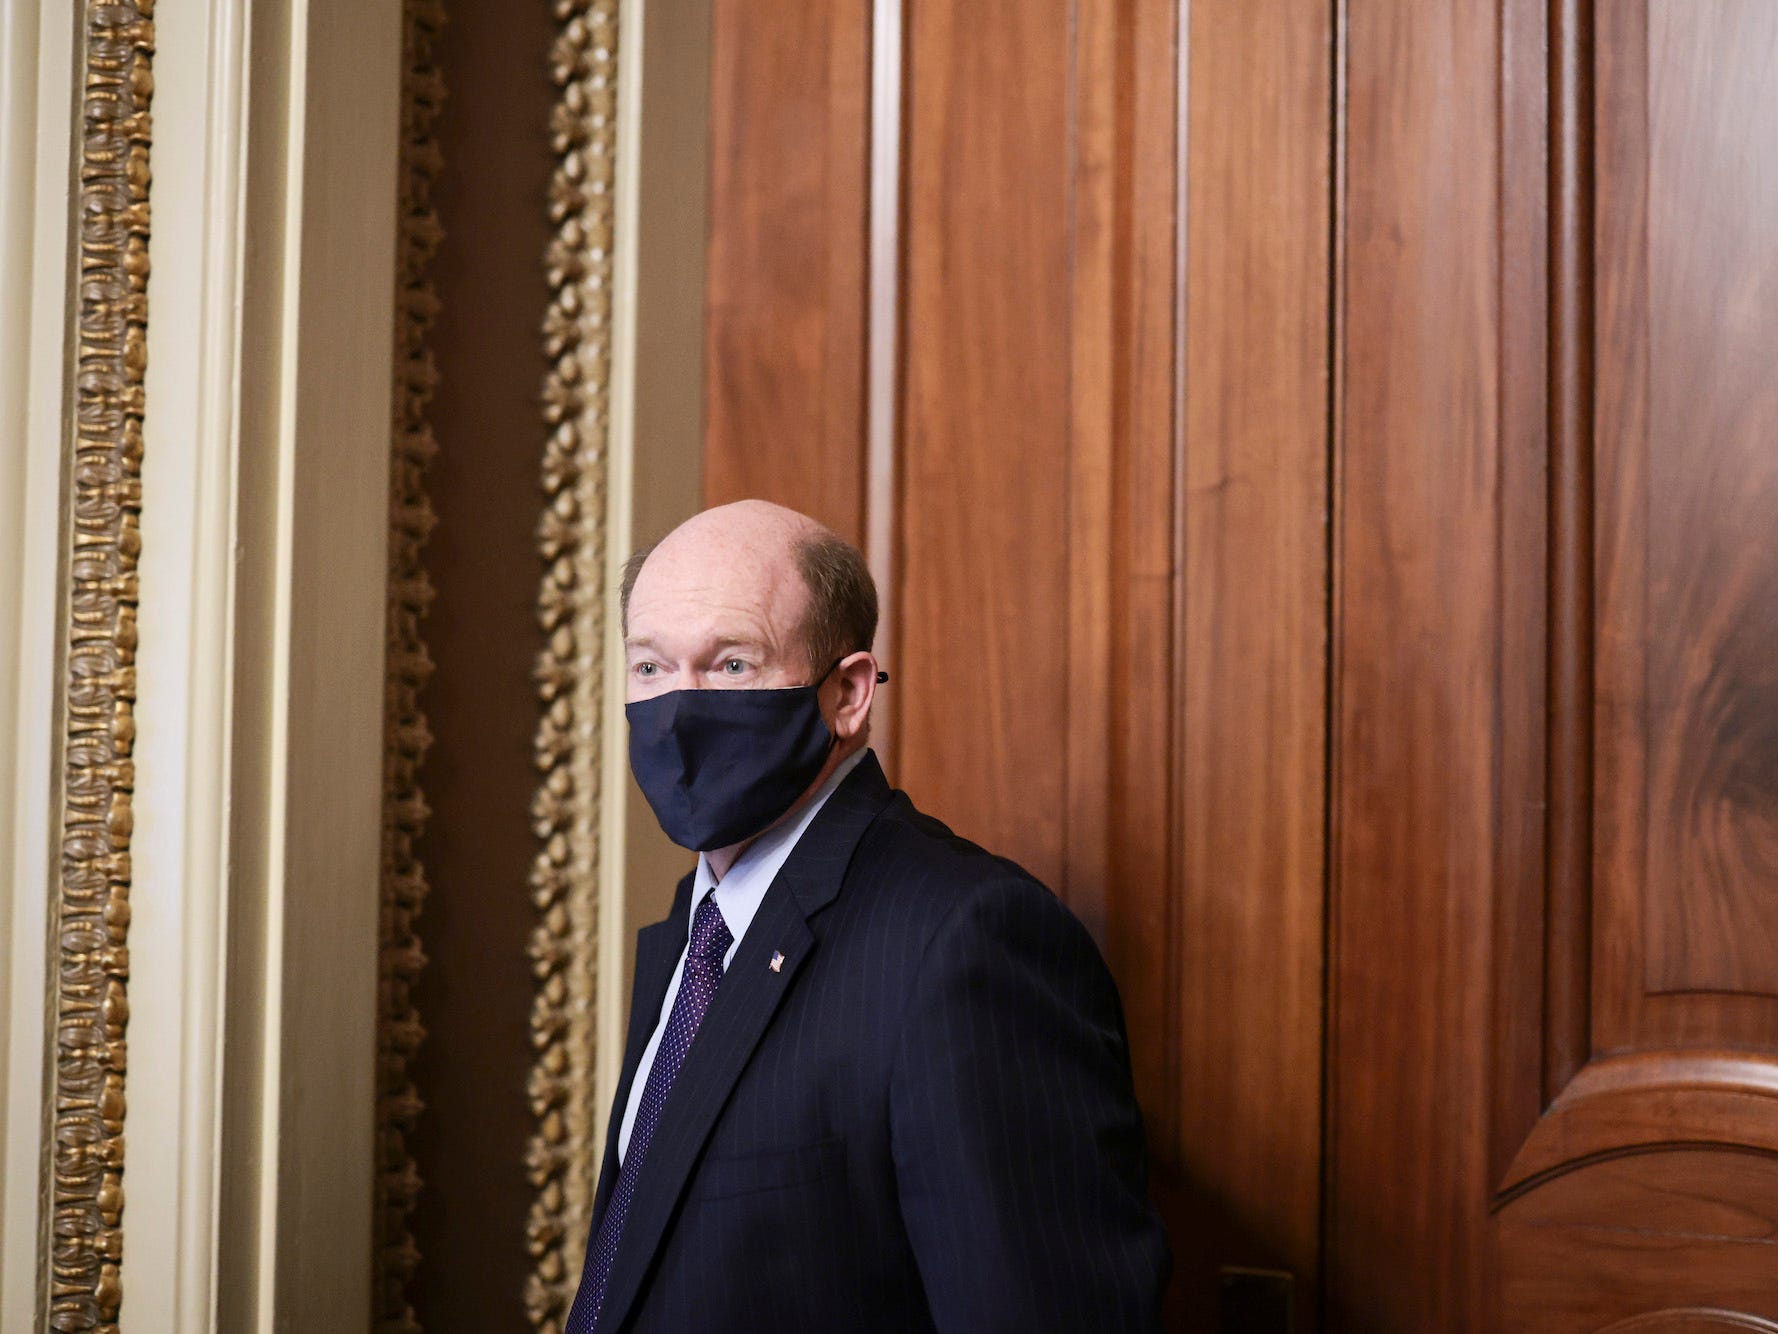 Sen. Chris Coons (D-DE) departs from a caucus meeting with Democratic Senators after a procedural vote on the debt limit was postponed at the U.S. Capitol Building on October 06, 2021 in Washington, DC. Congress has until October 18 to raise the debt ceiling or risk a default that would have widespread economic consequences. (Photo by Anna Moneymaker/Getty Images)